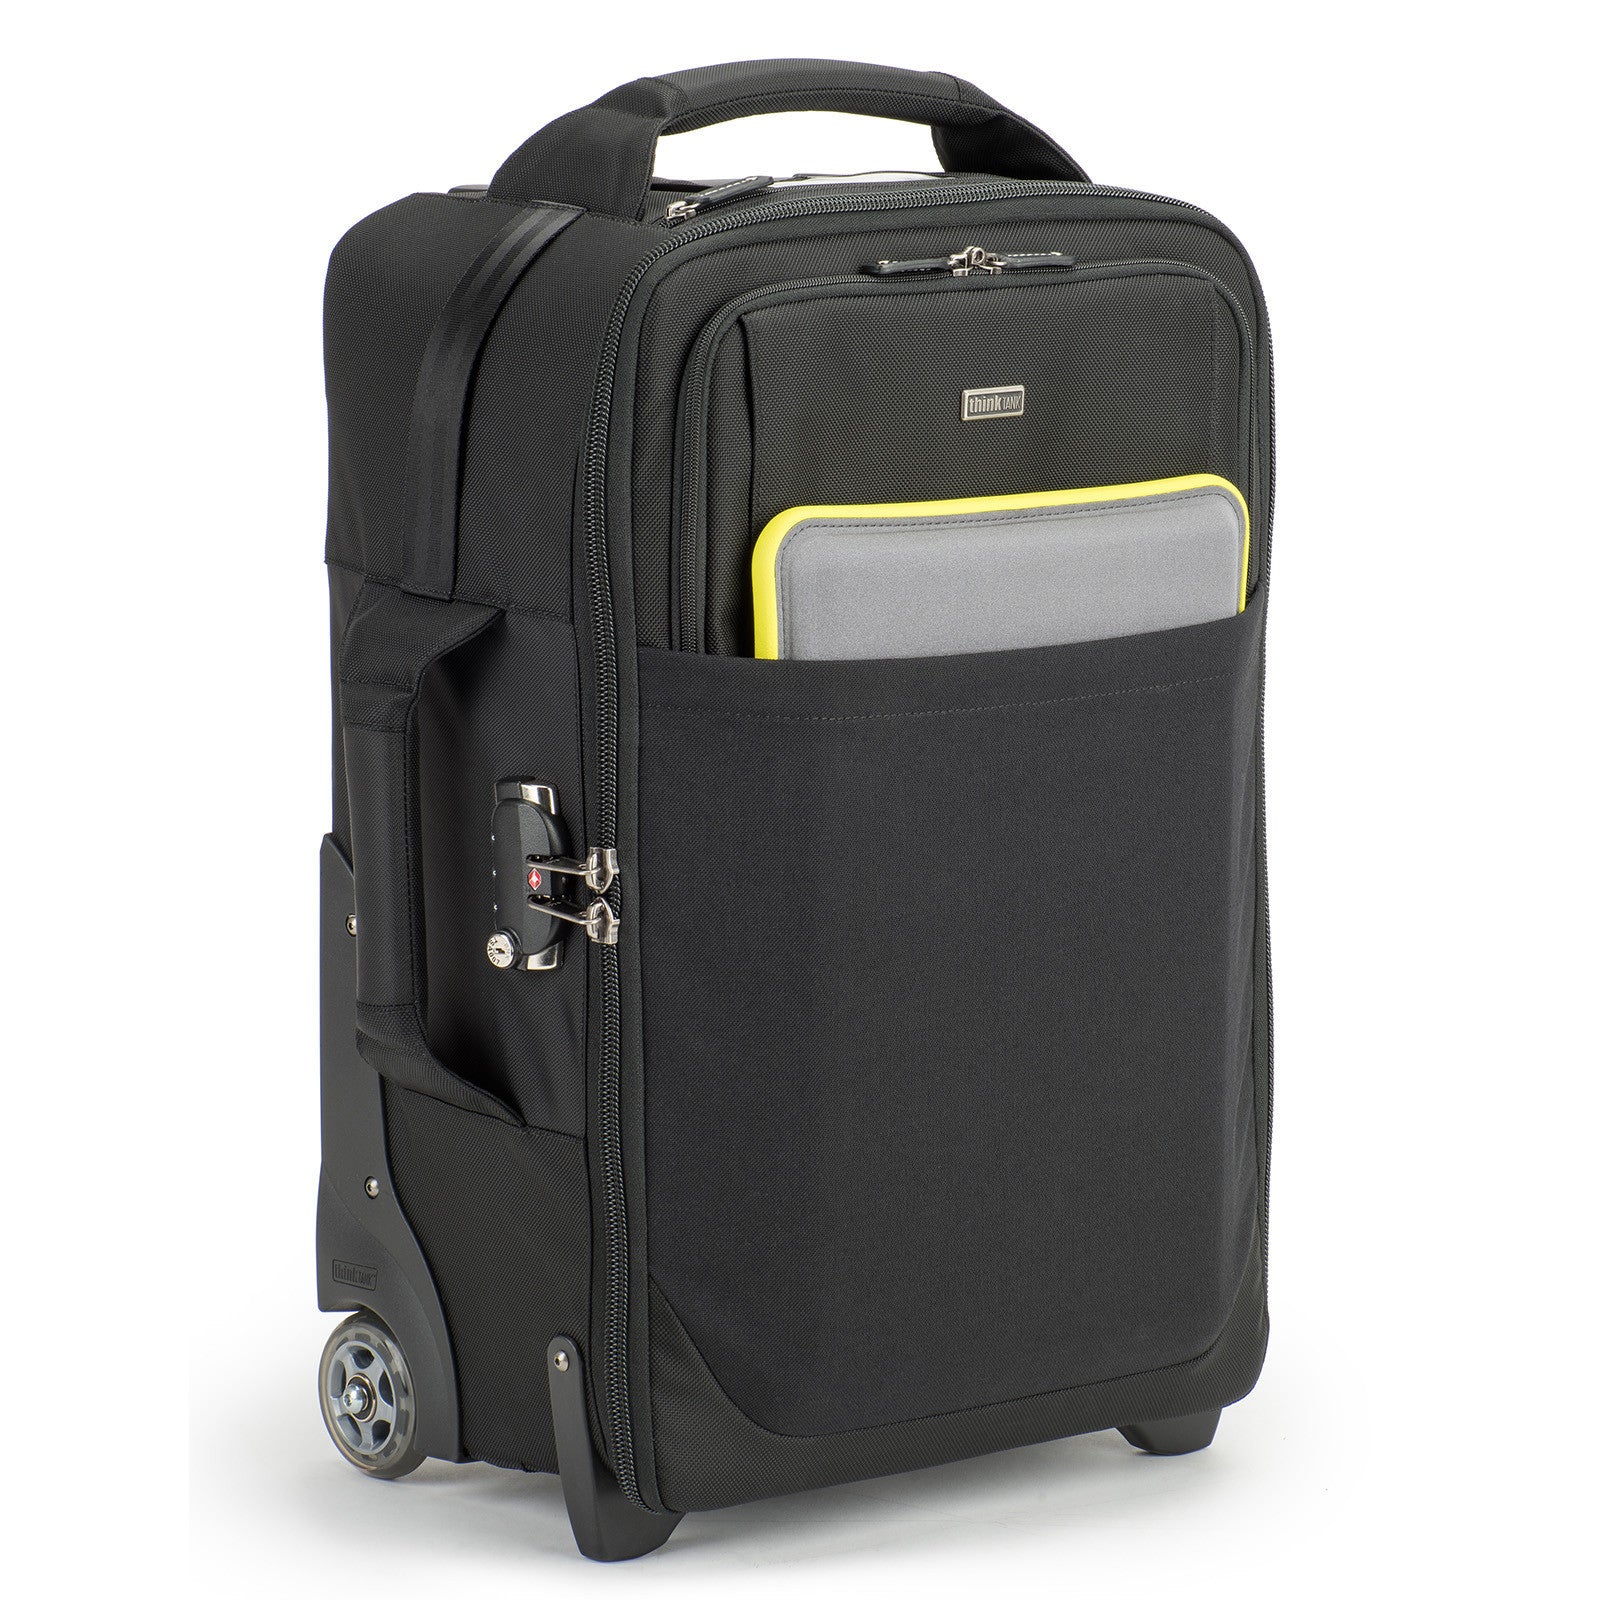 Think Tank Airport International V3.0 Rolling Camera Bag, bags roller bags, Think Tank Photo - Pictureline  - 5